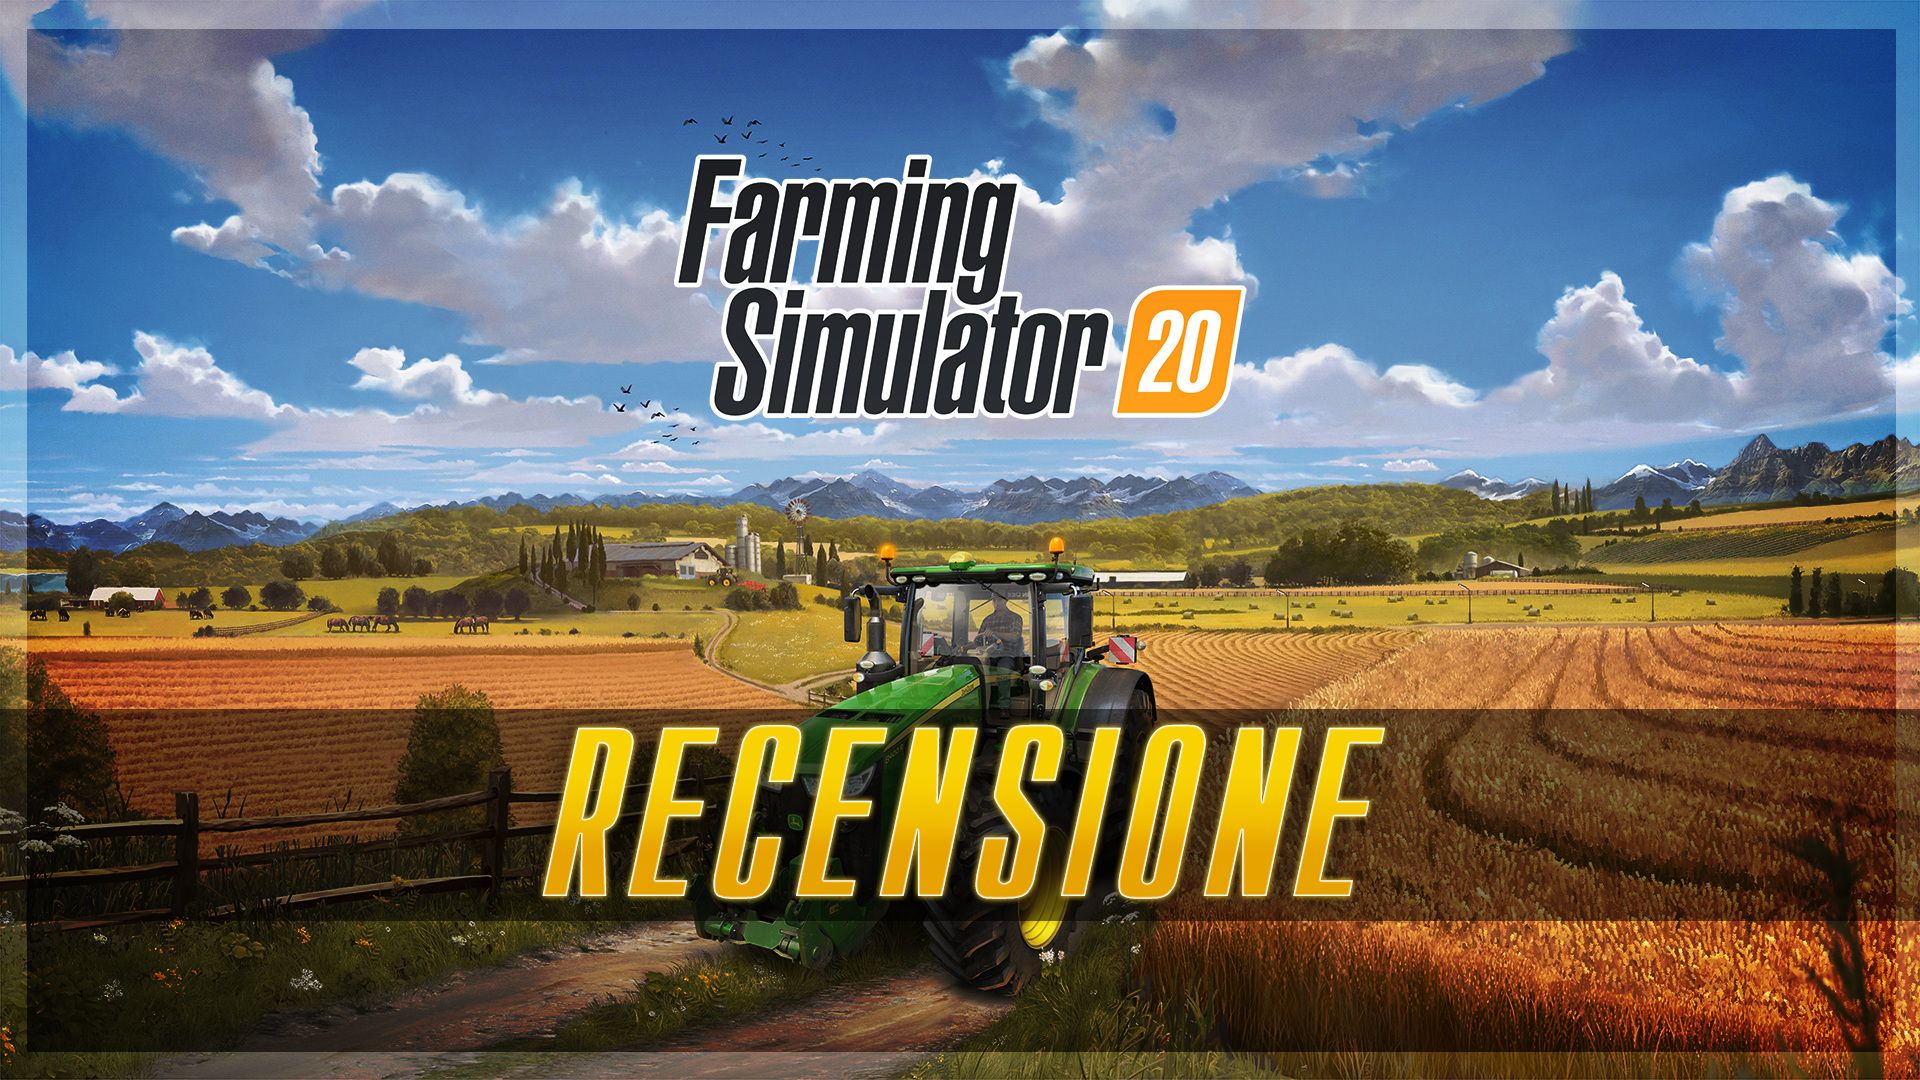 Farming Simulator 20 Let's Talk About Video Games